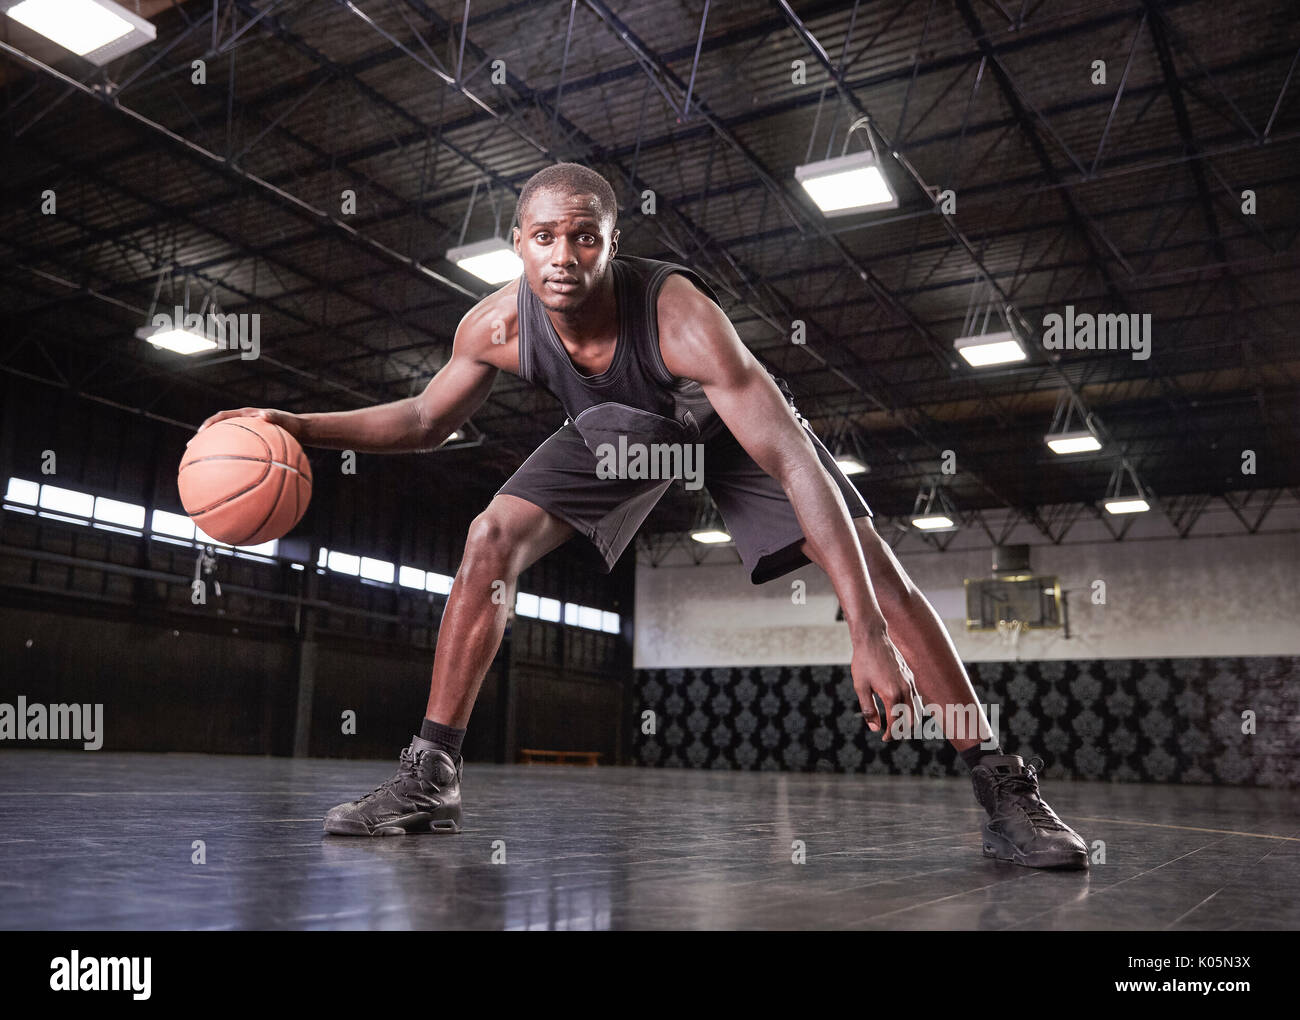 Portrait confident young male basketball player dribbling the ball on court in gymnasium Stock Photo